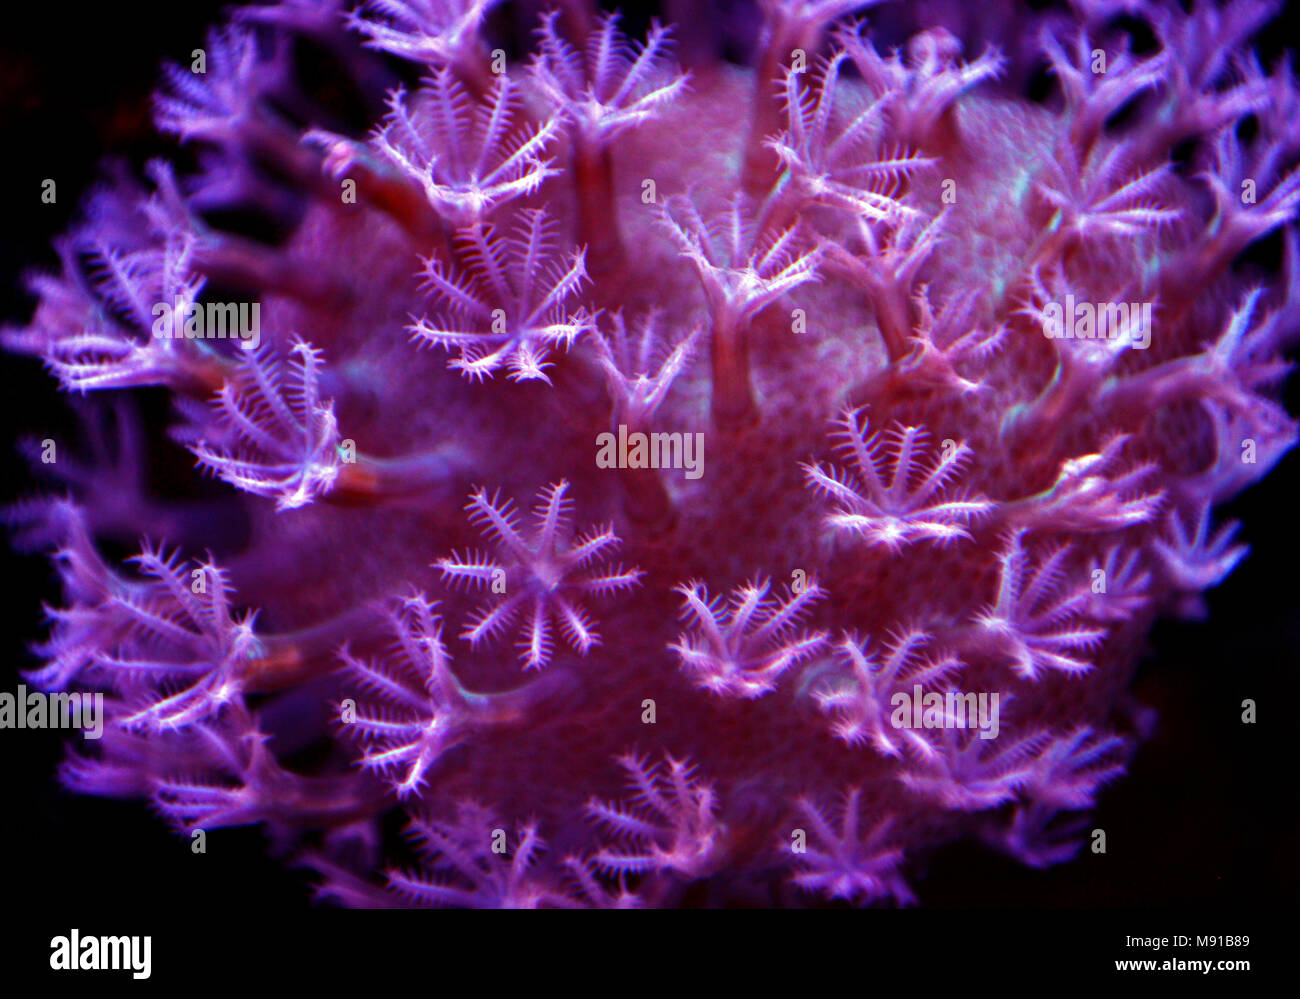 Sarcophyton leather soft coral Stock Photo